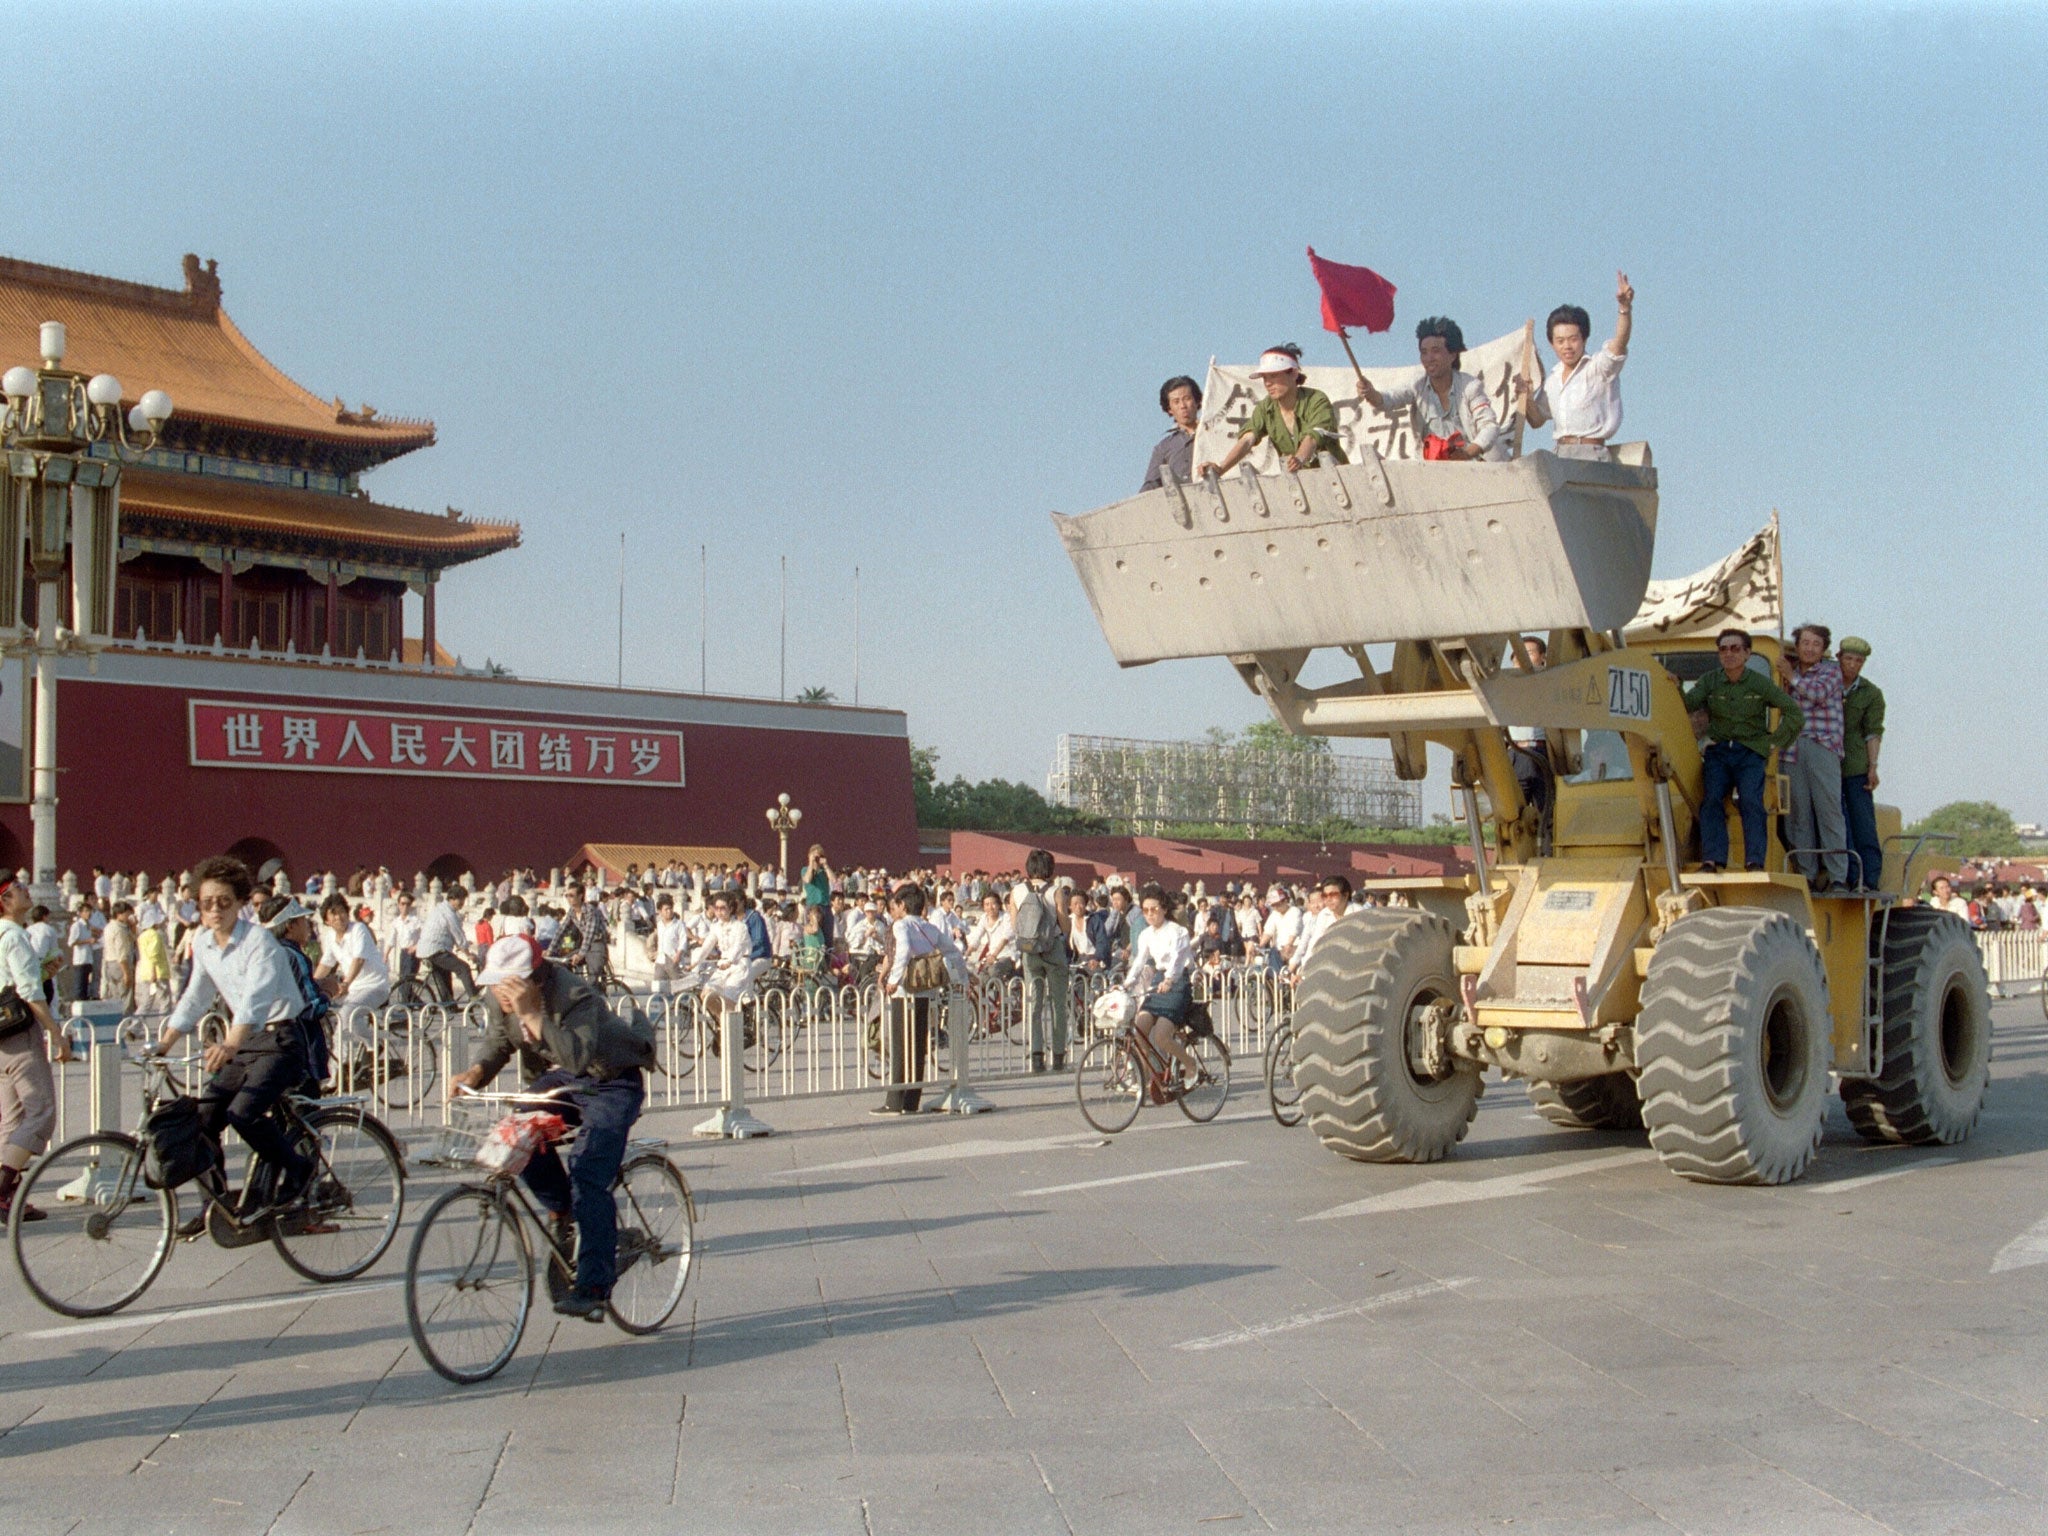 The events of Tiananmen Square inspired which play?